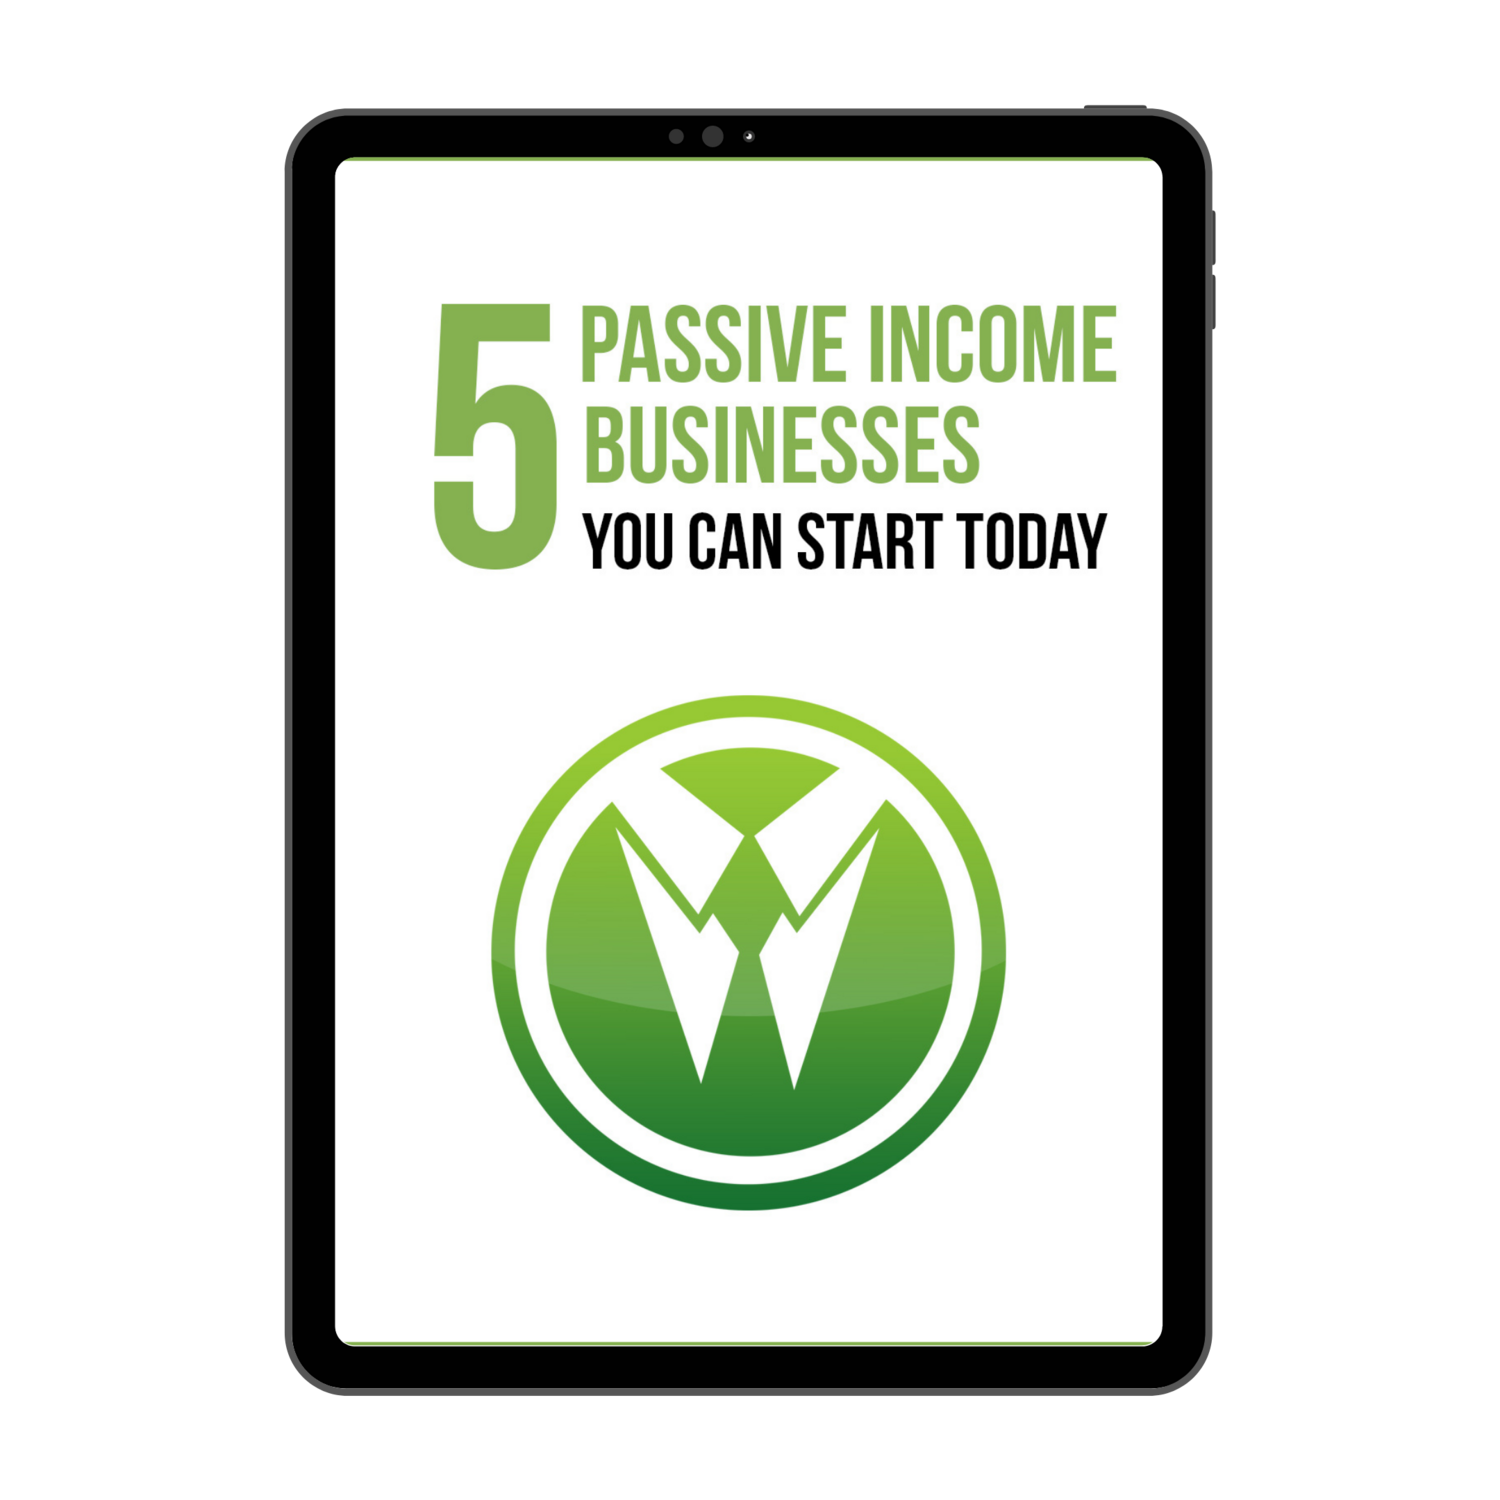 5 Passive Income Business You Can Start Today E-Book